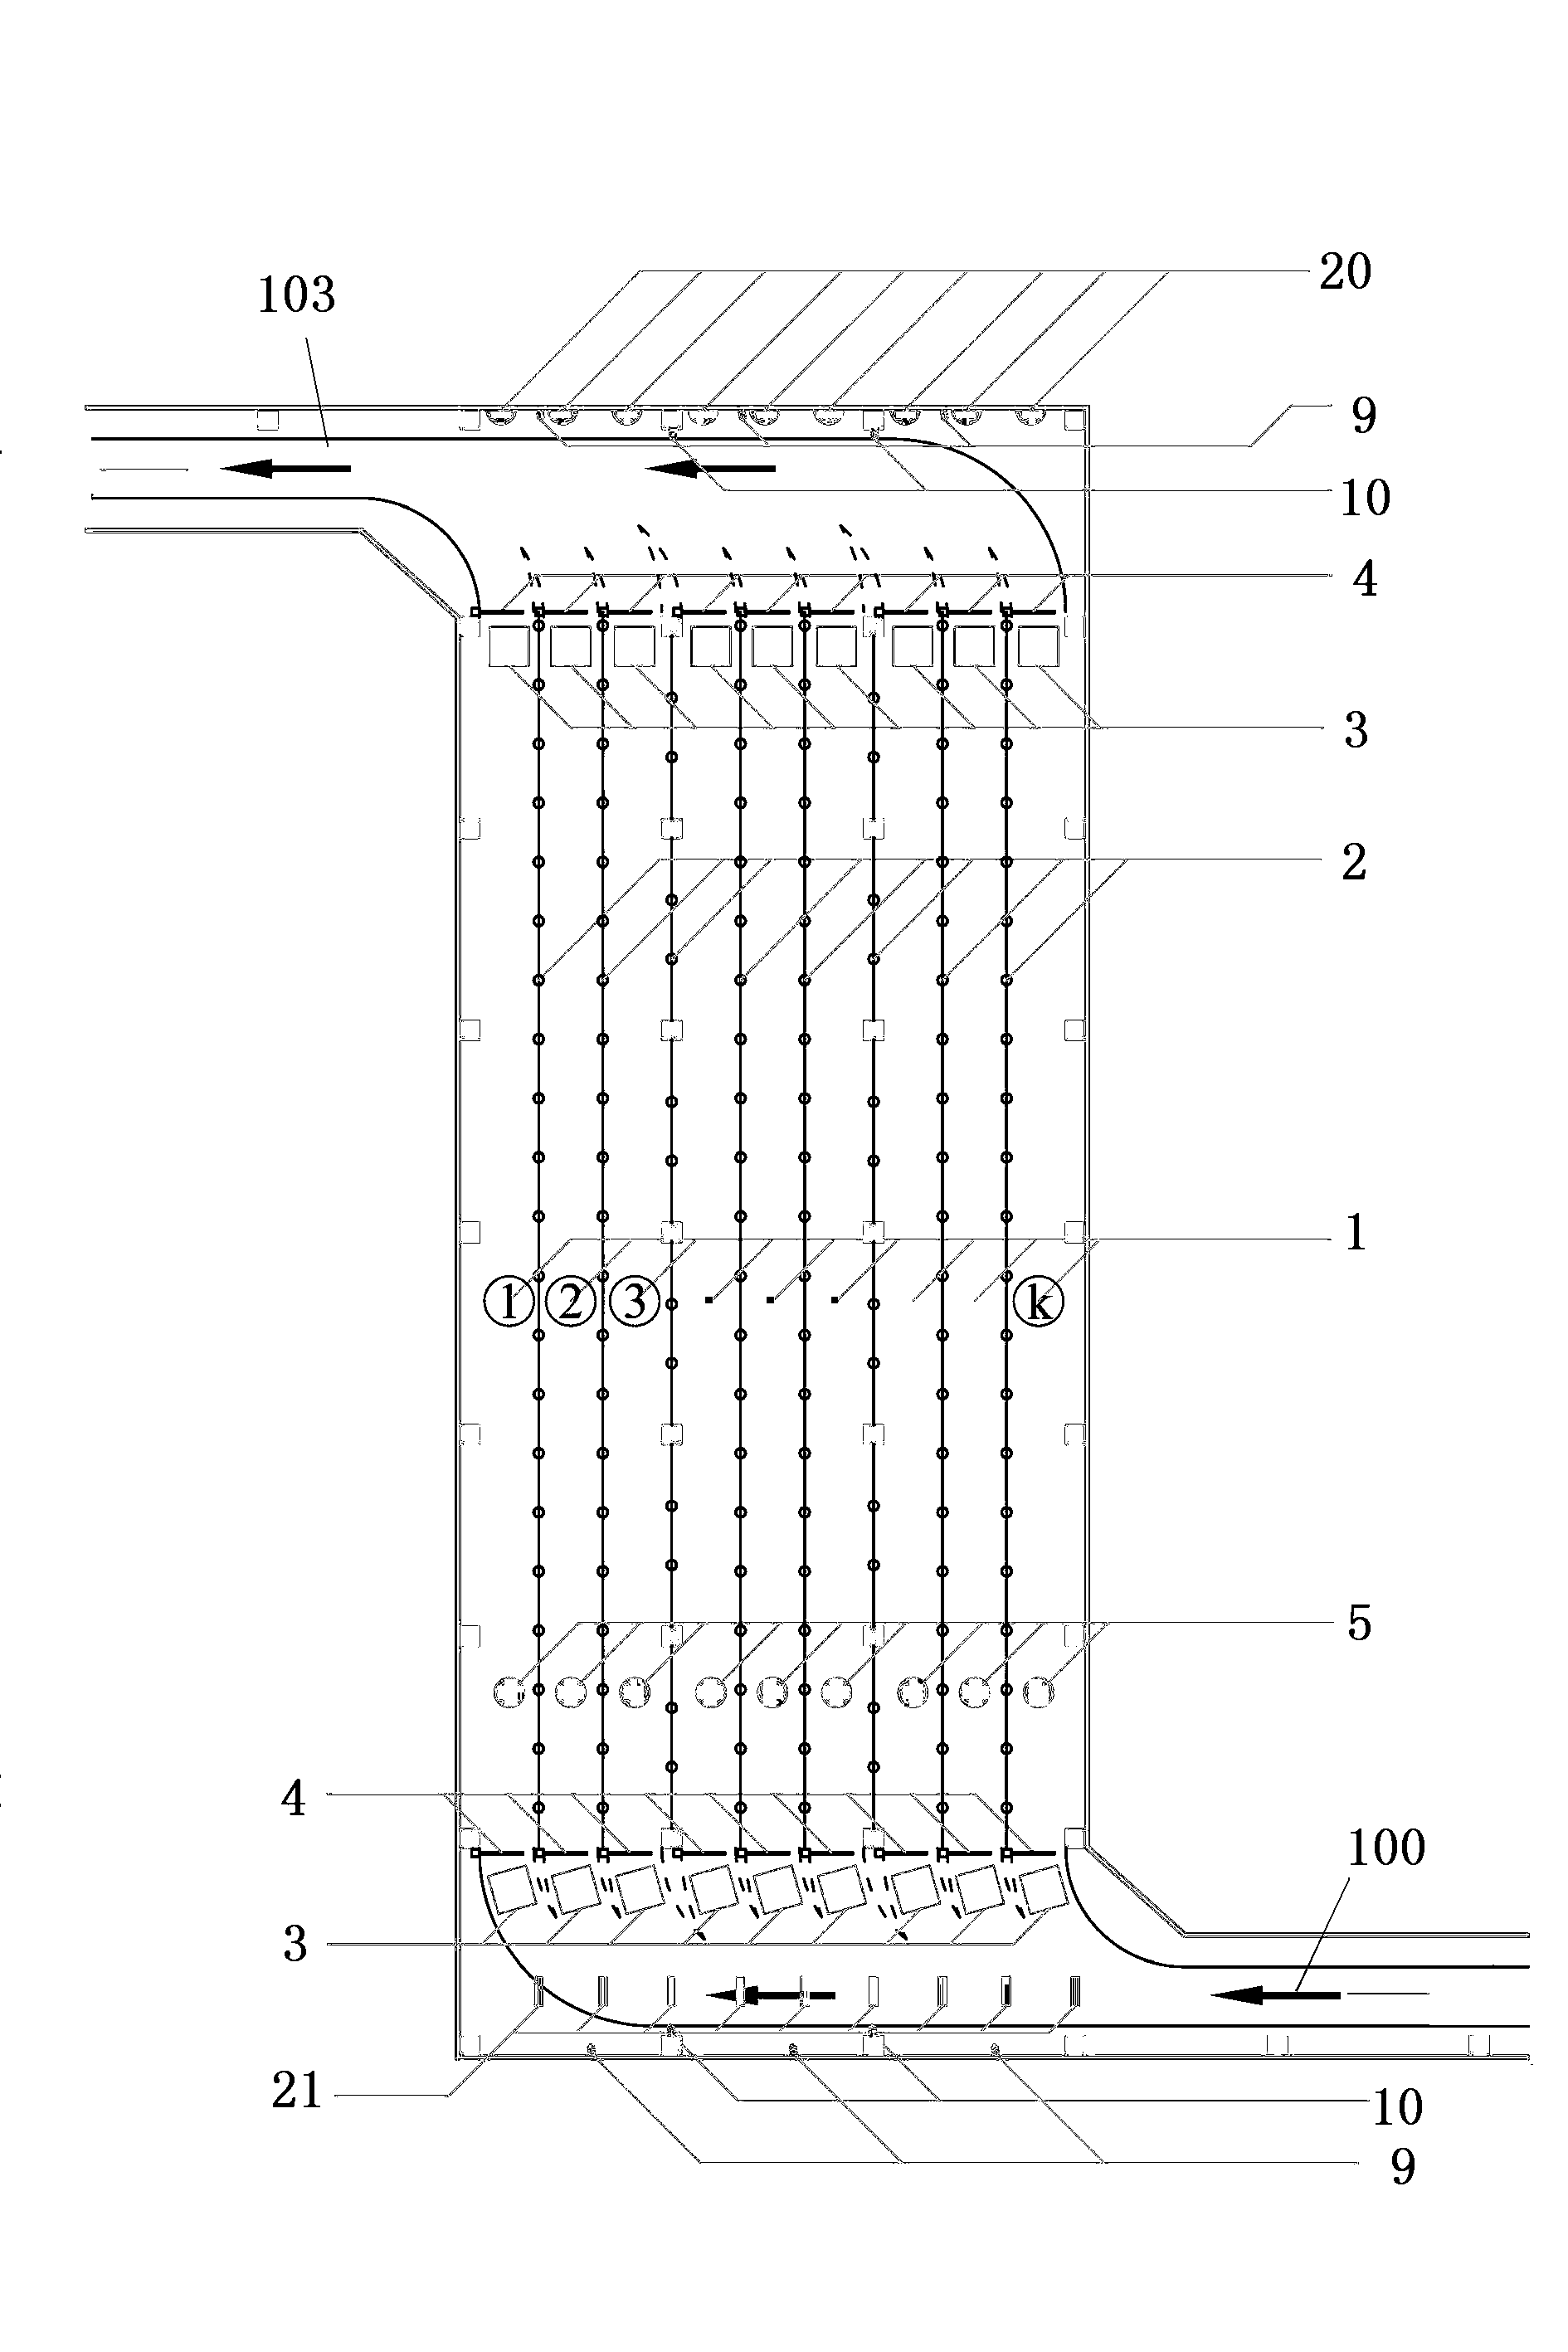 Large-scale taxi storage yard control system and control method thereof